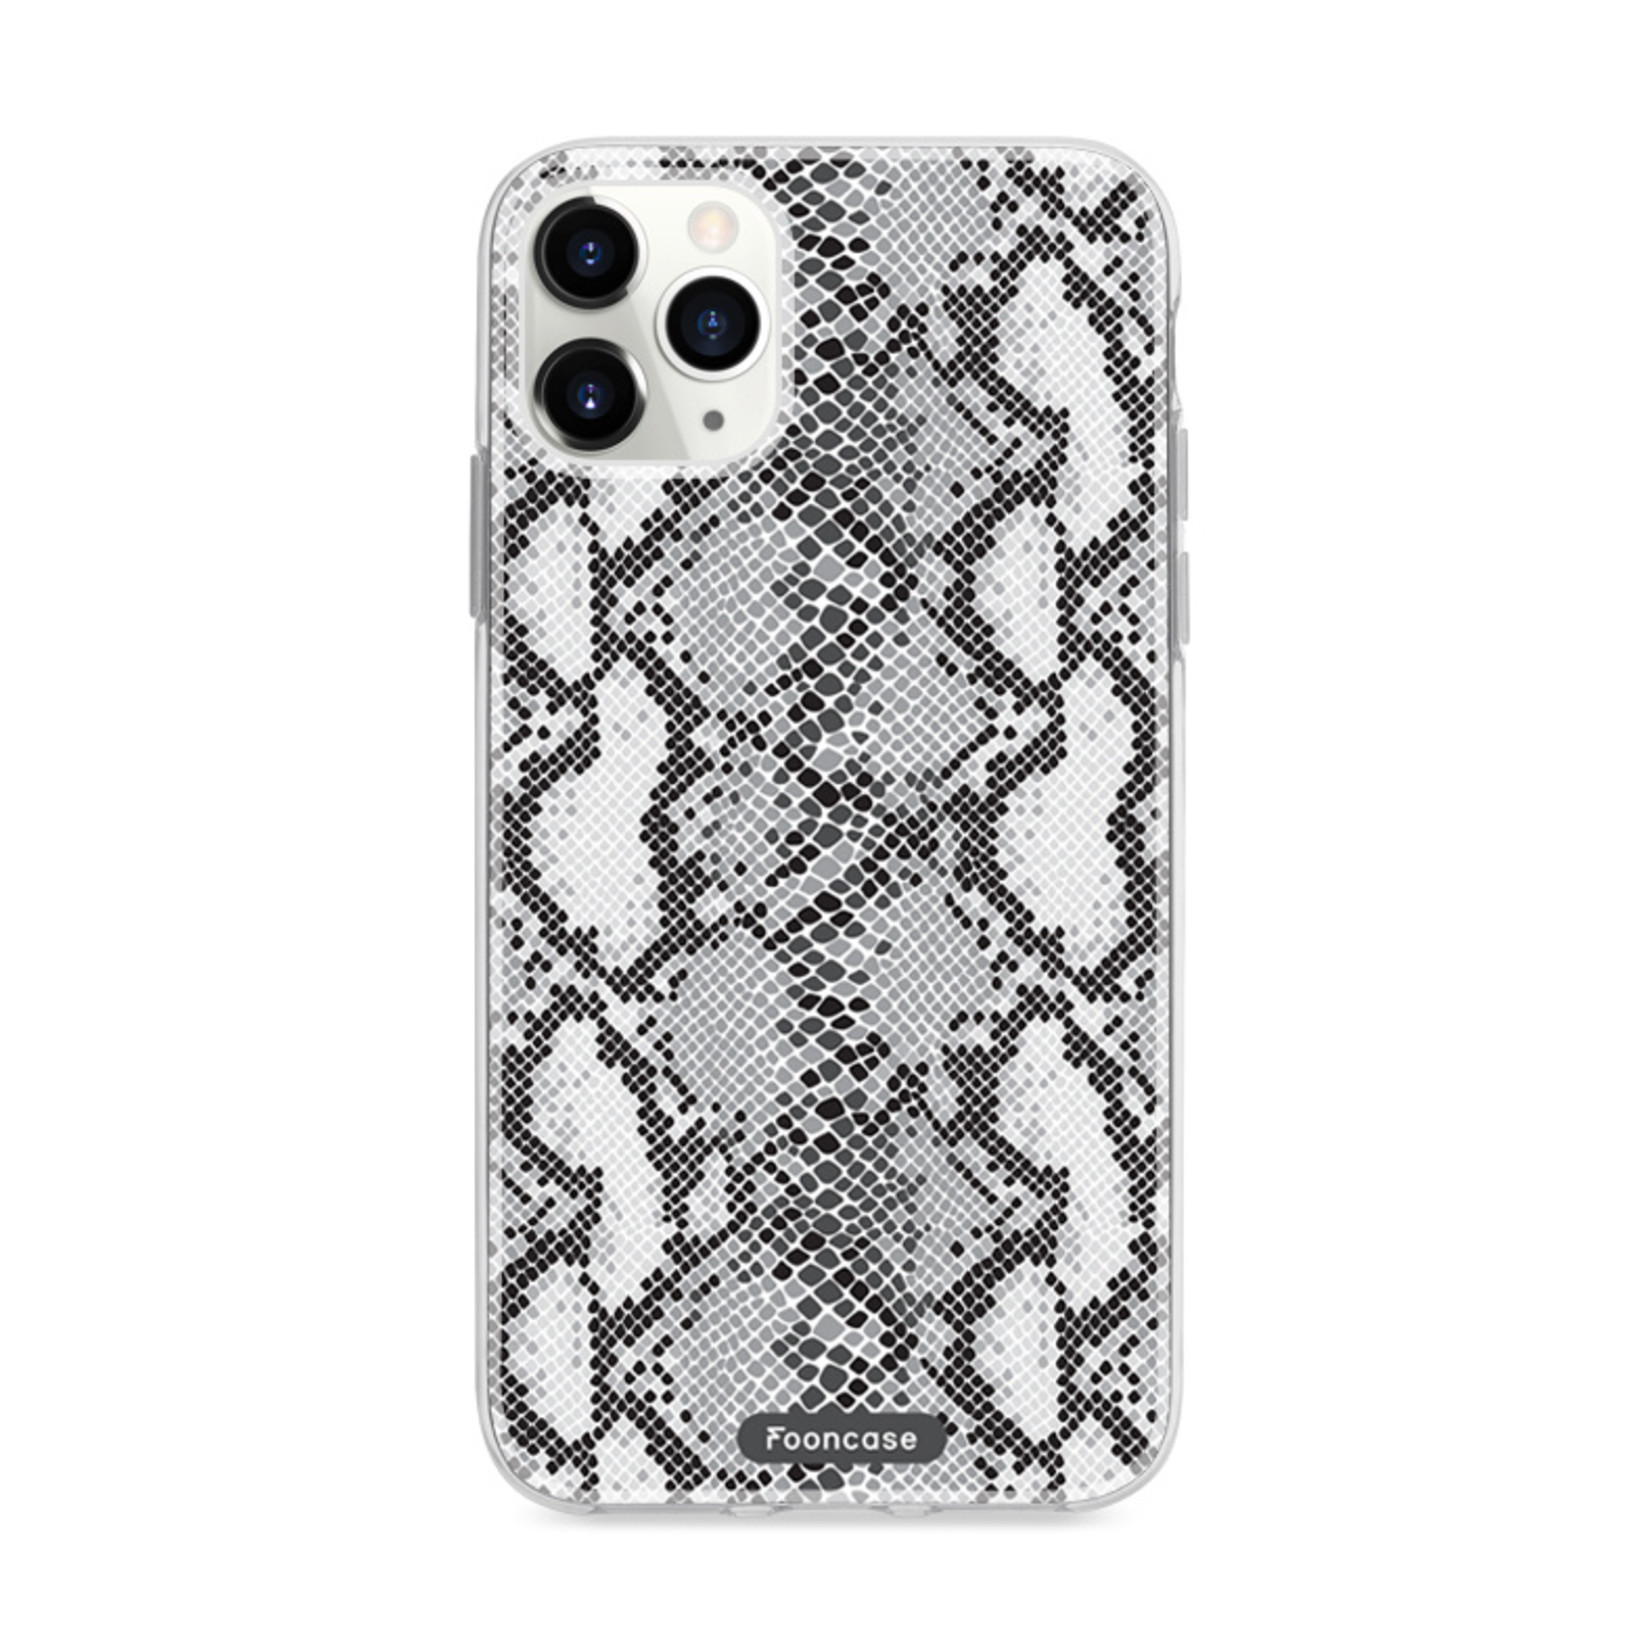 FOONCASE IPhone 11 Pro Cover - Snake it!